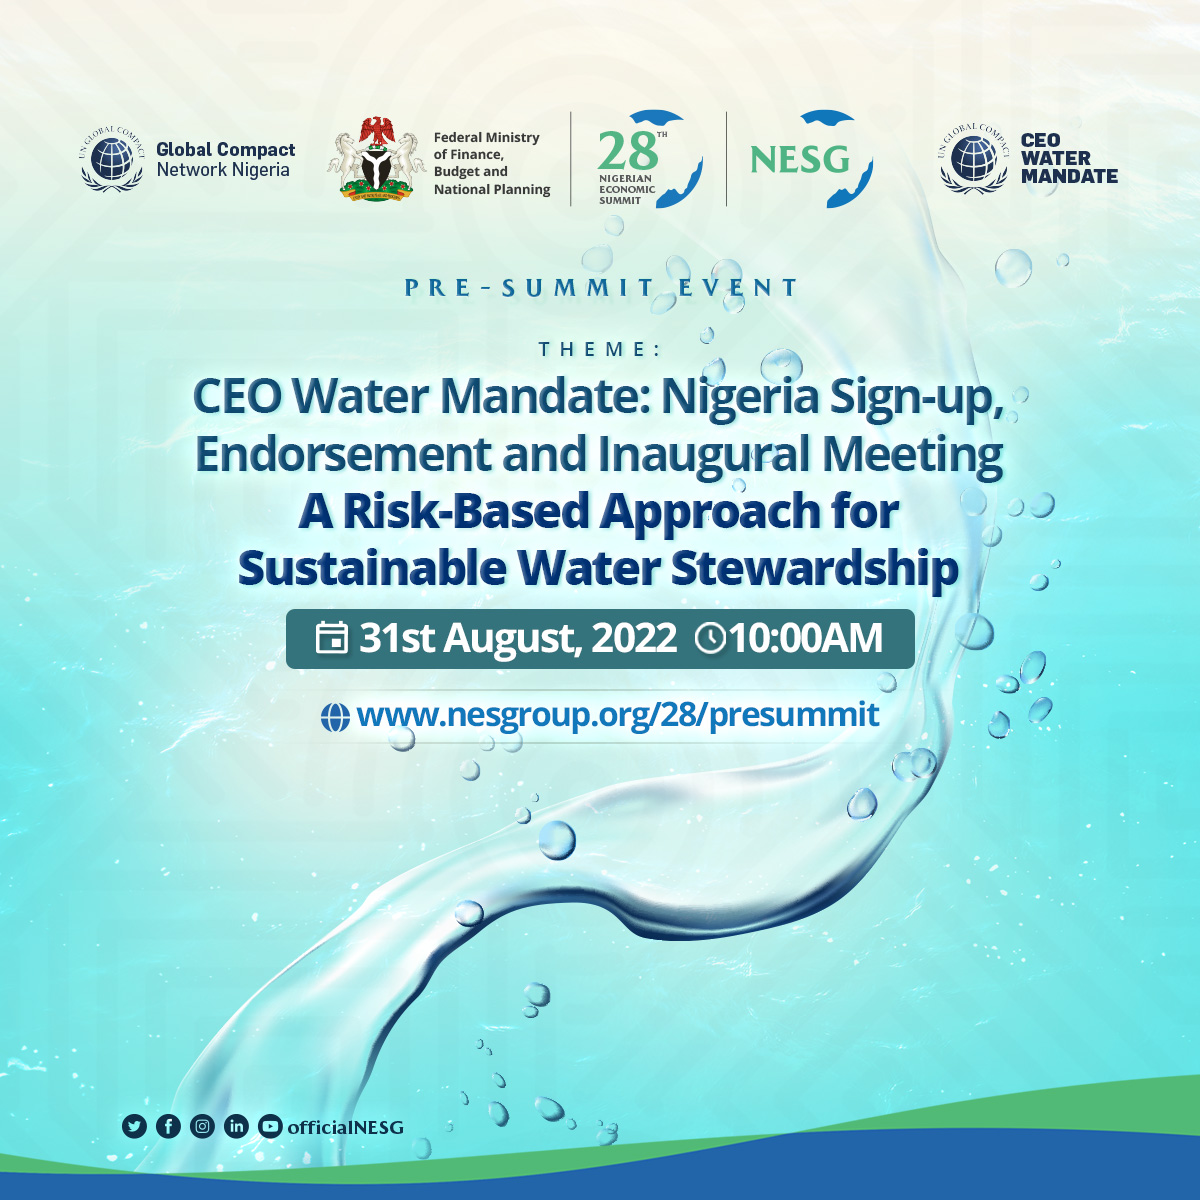 NESG, UNGC hold CEO Water Mandate Inaugural Meeting,  The Nigerian Economic Summit Group